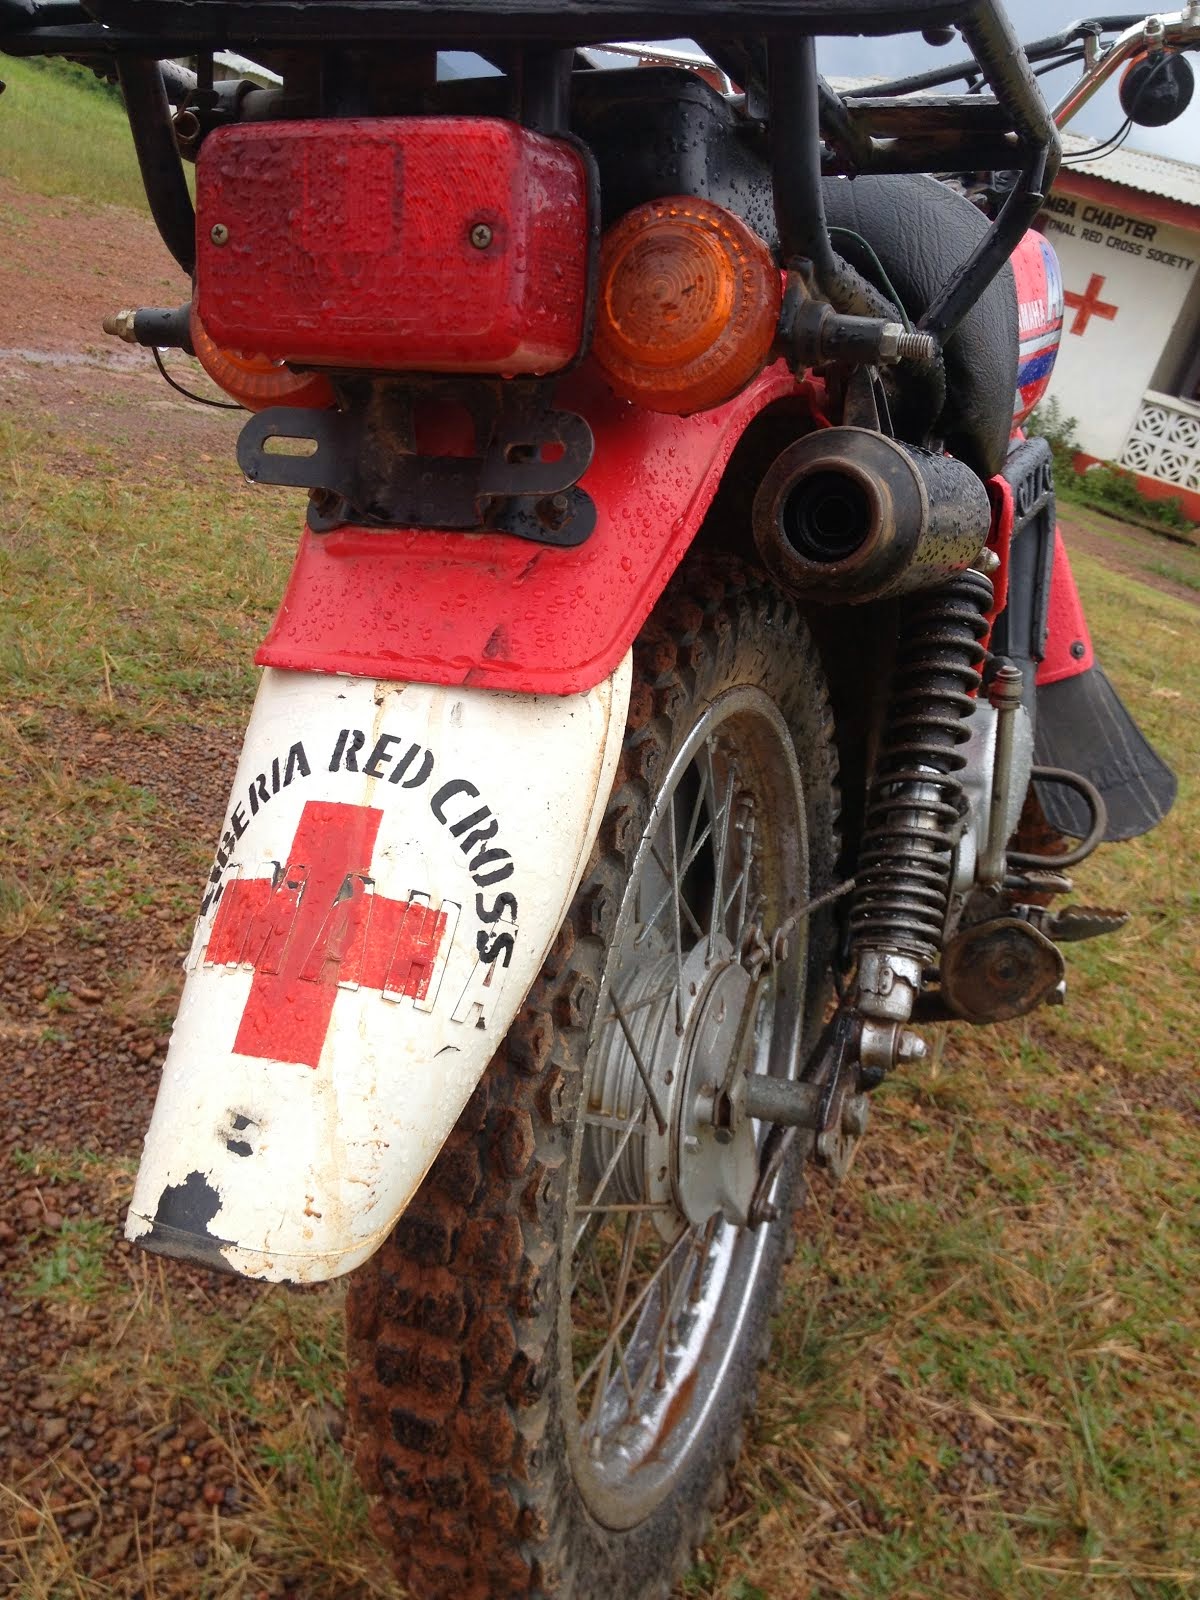 Supporting the Red Cross to fight Ebola in West Africa - click on the motorbike to give